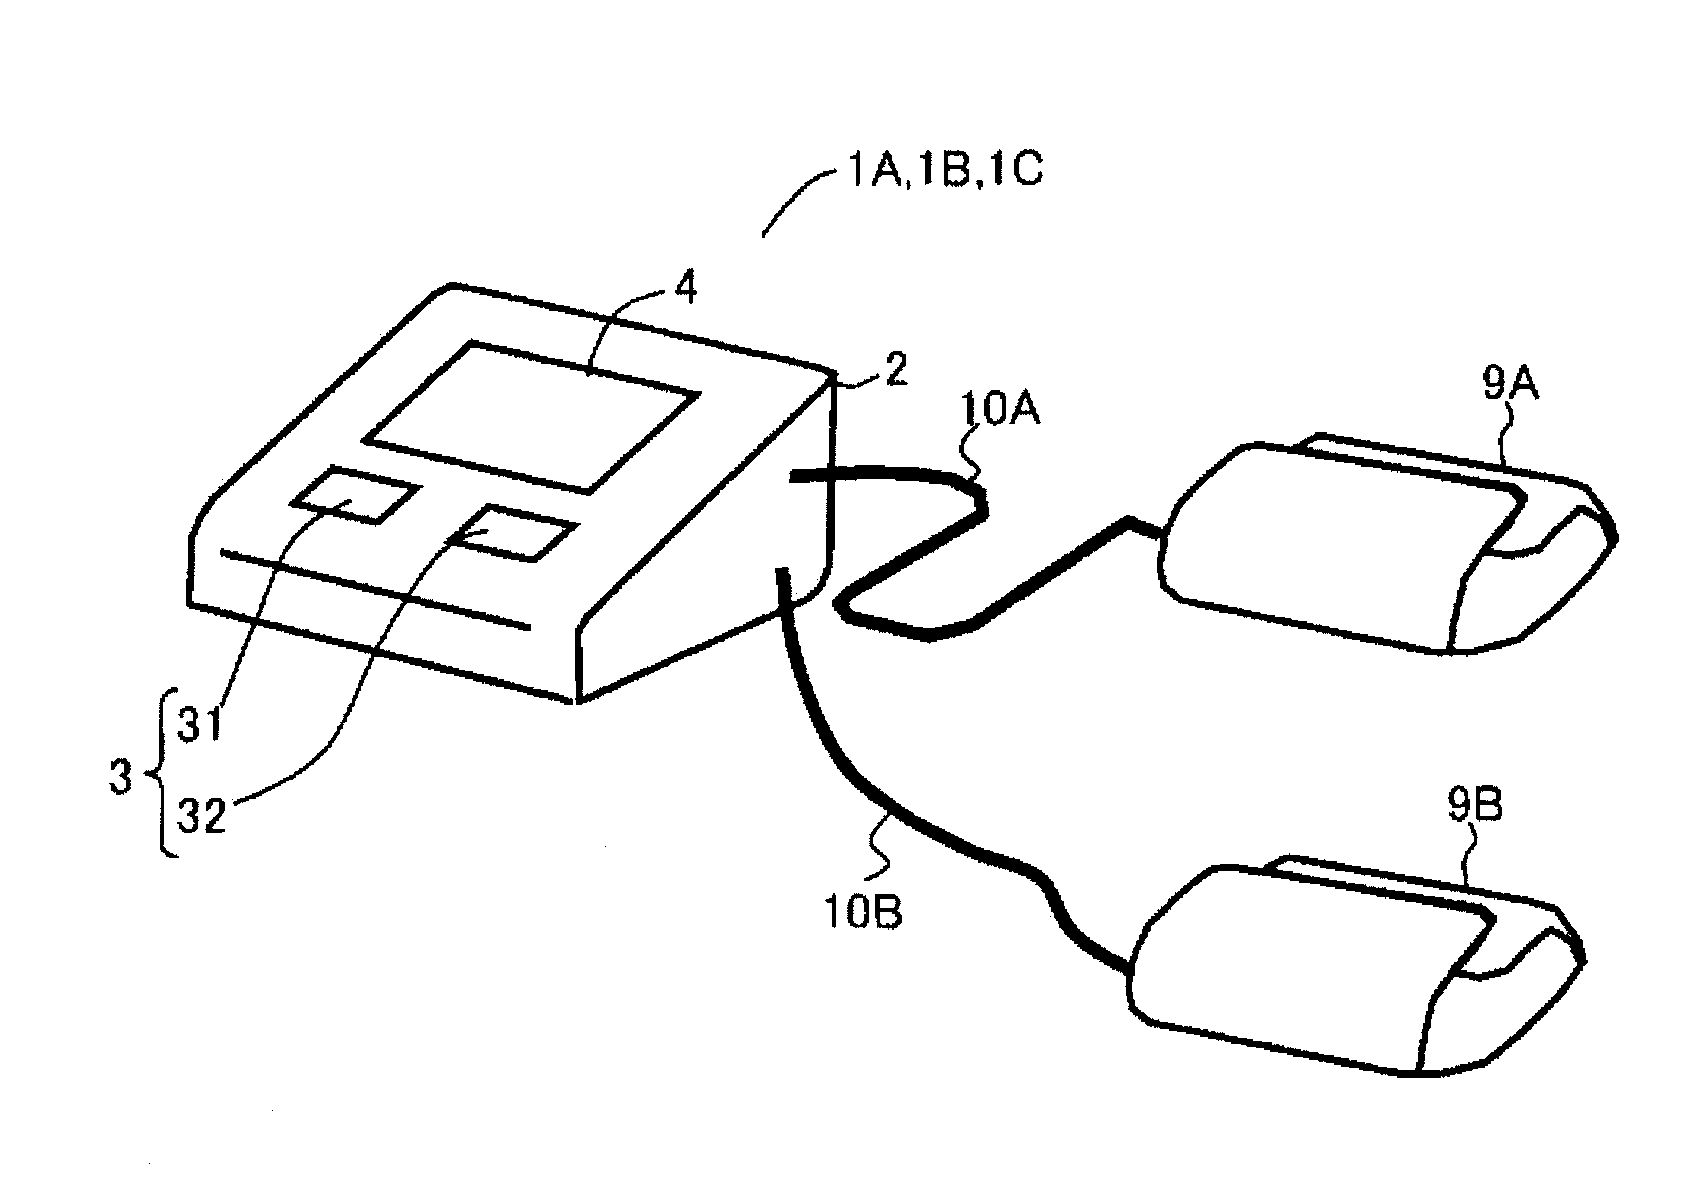 Blood pressure information measurement device for measuring pulse wave propagation speed as blood pressure information